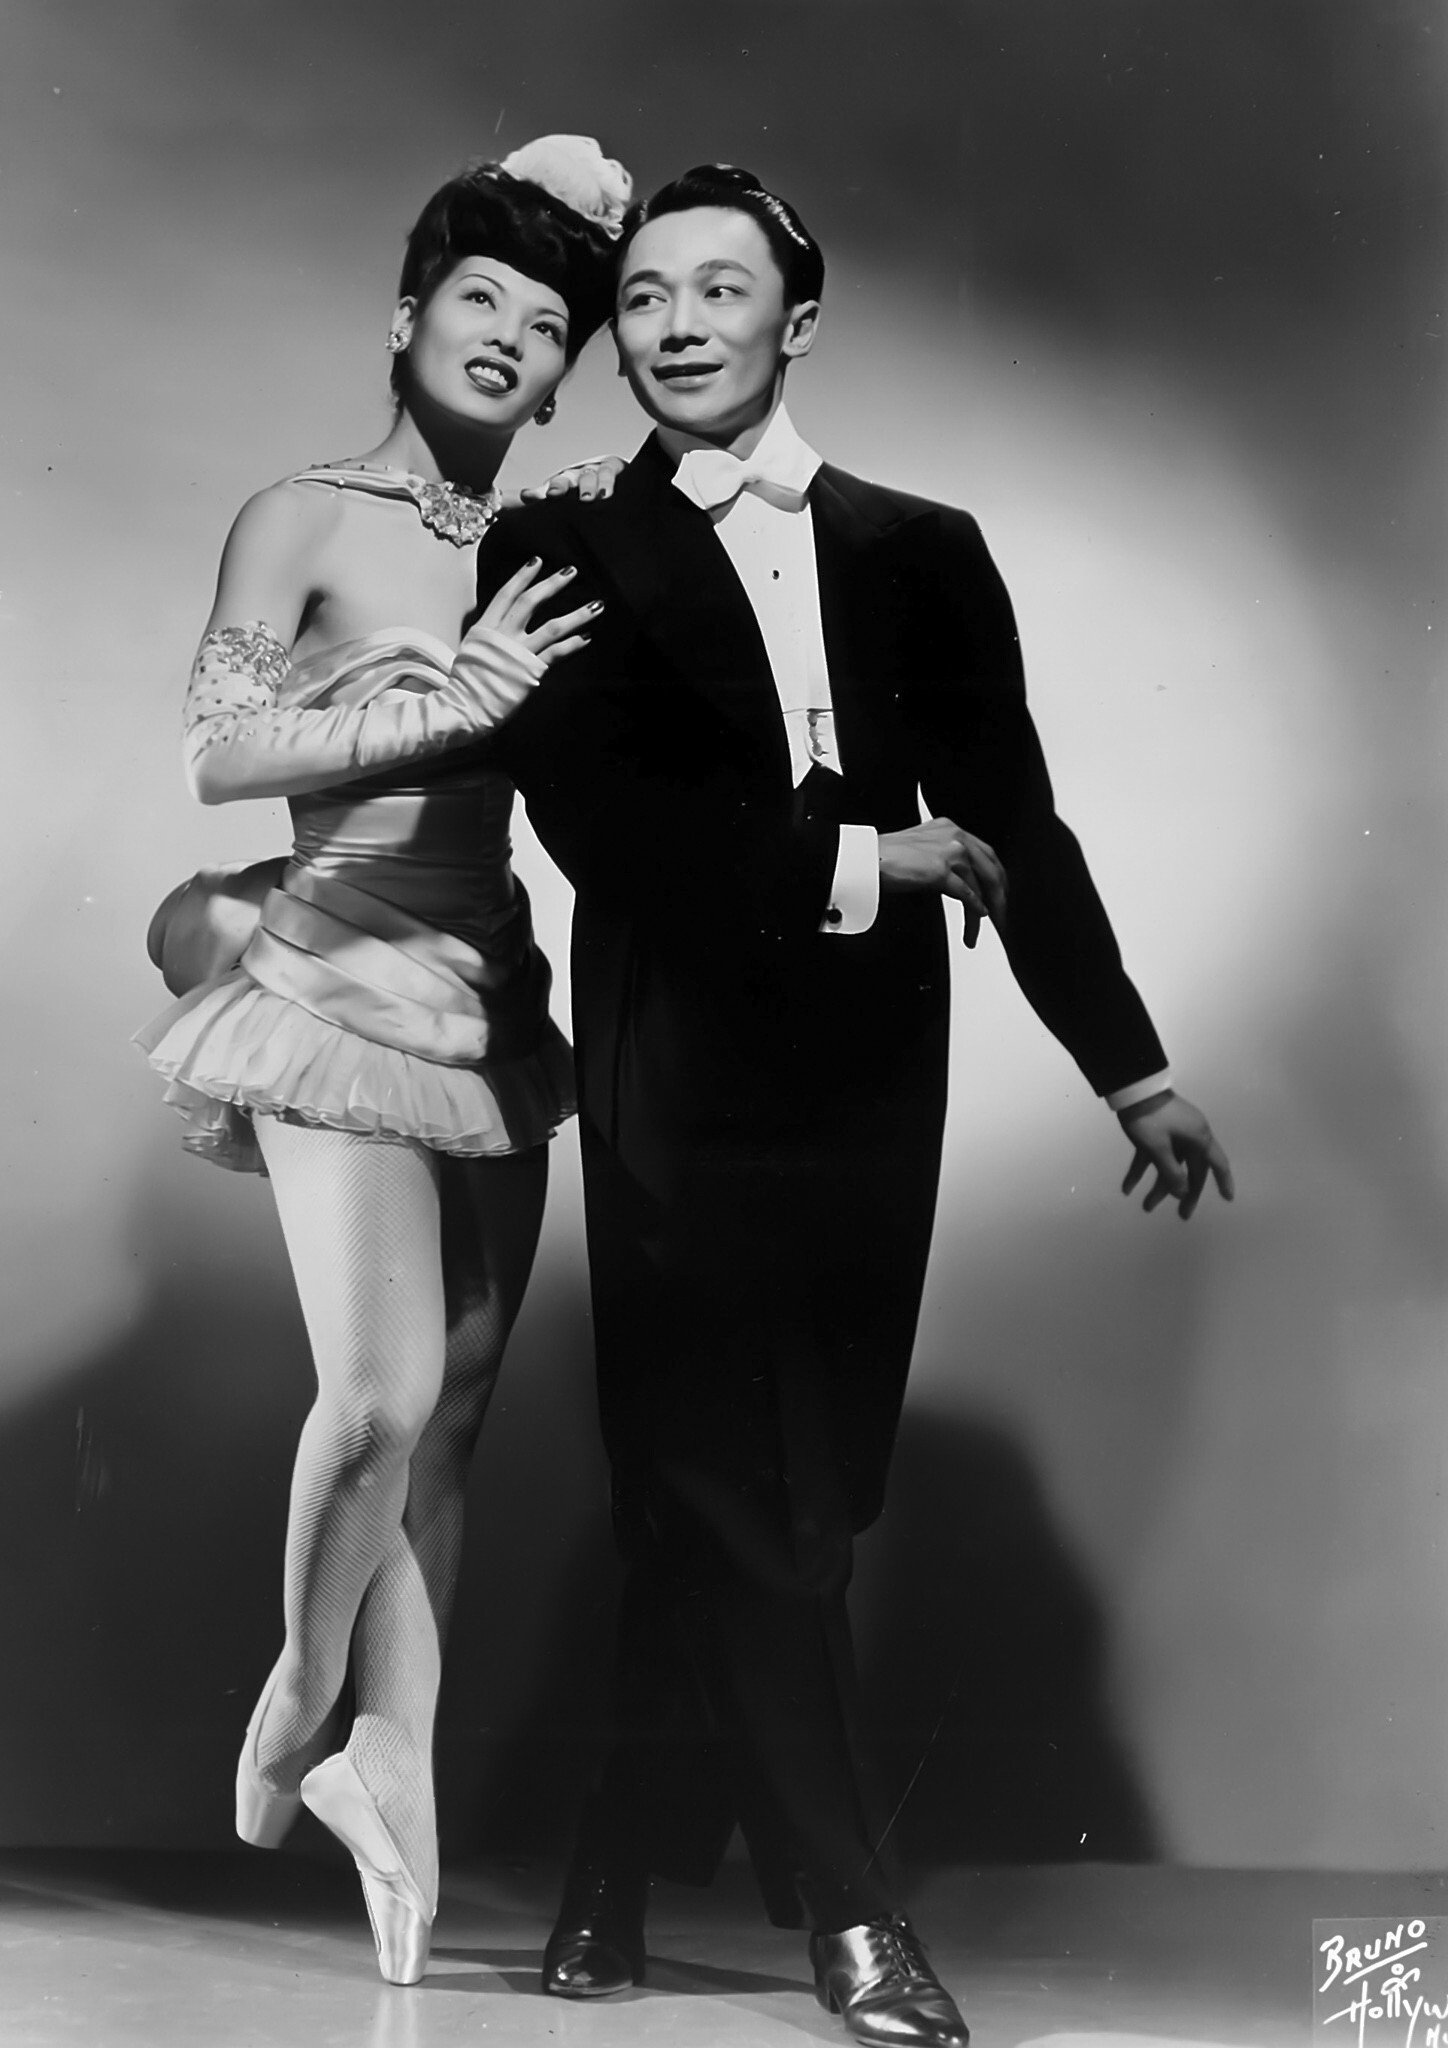 Handout image shows Dorothy Toy (Shigeko Takahashi) and Paul Wing, in Hollywood. Wing and Toy were well known as a tap dance couple in their heyday. Circa 1930s, when they were regarded as the Chinese Fred Astaire and Ginger Rogers â except that Toy was Japanese. [03SEPTEMBER2020 FEATURES] CREDIT: Bruno of Hollywood